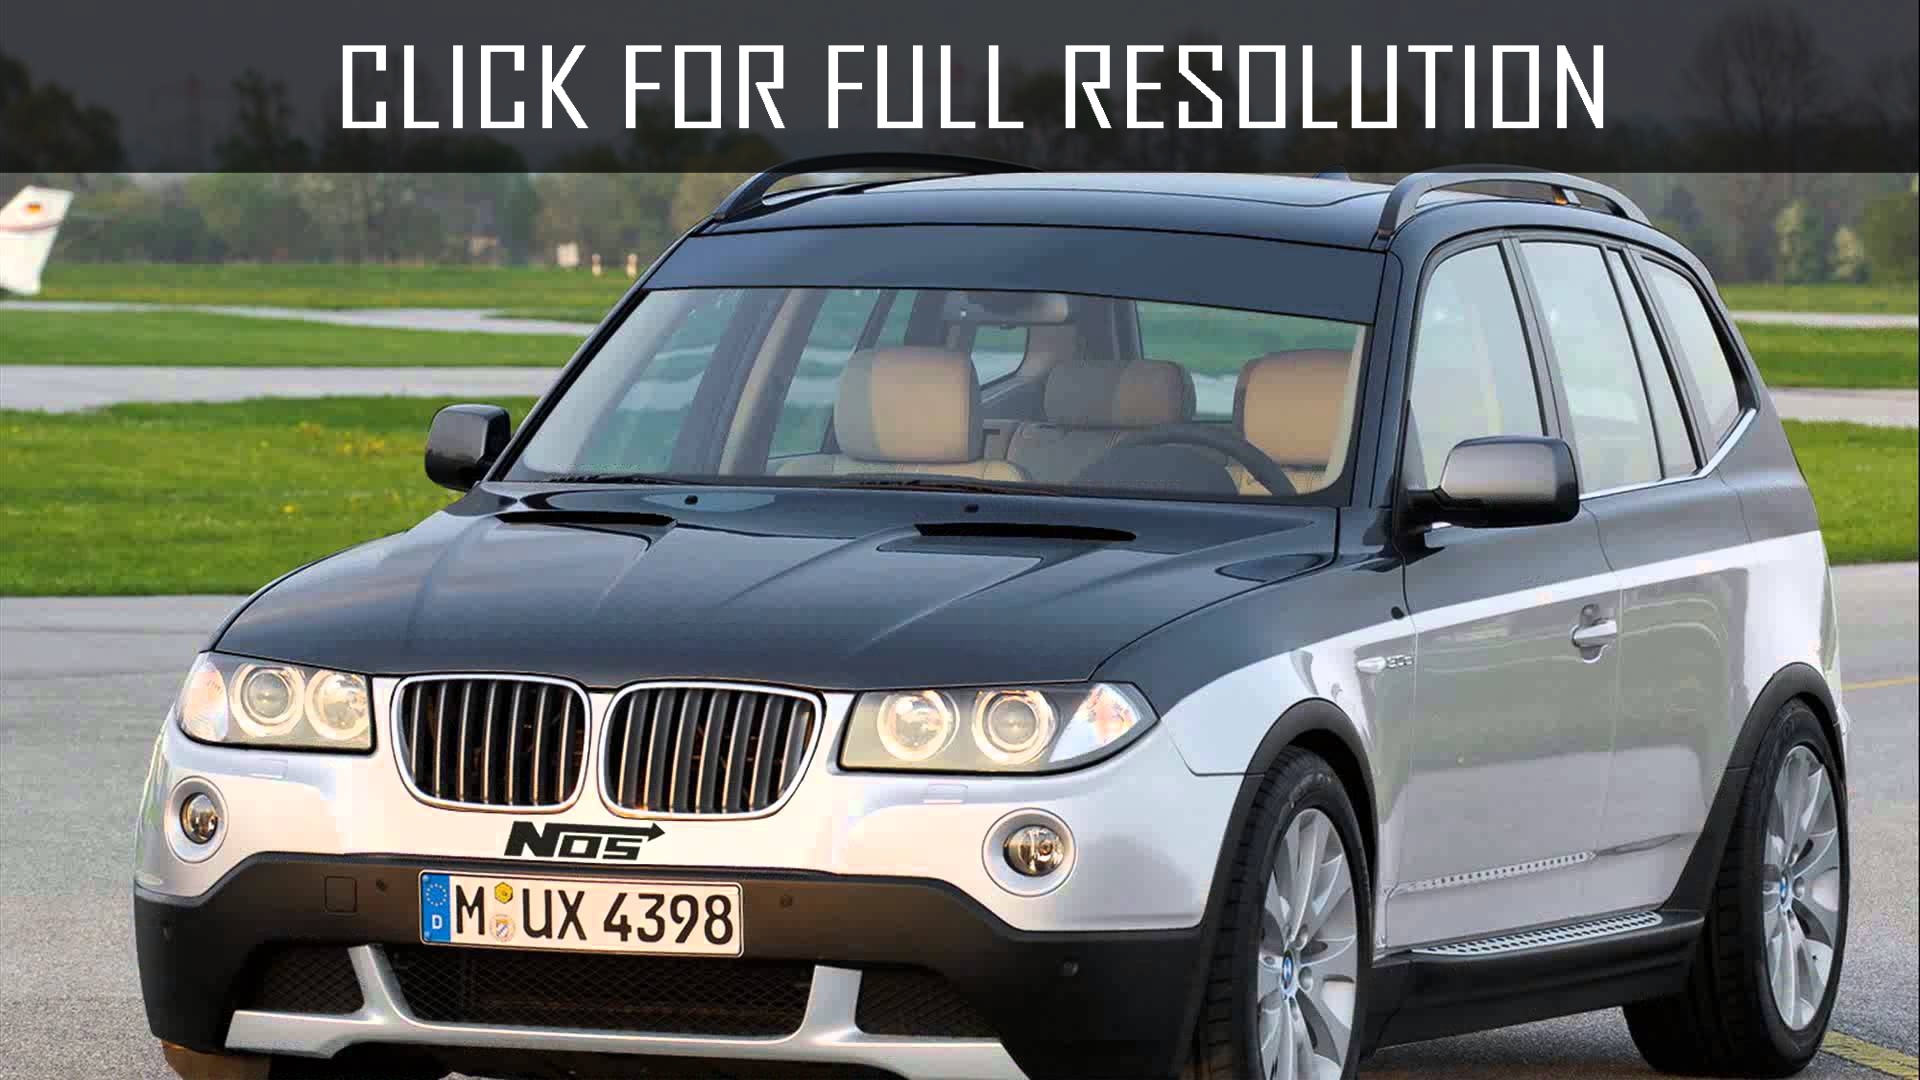 Bmw X3 E83 Tuning amazing photo gallery, some